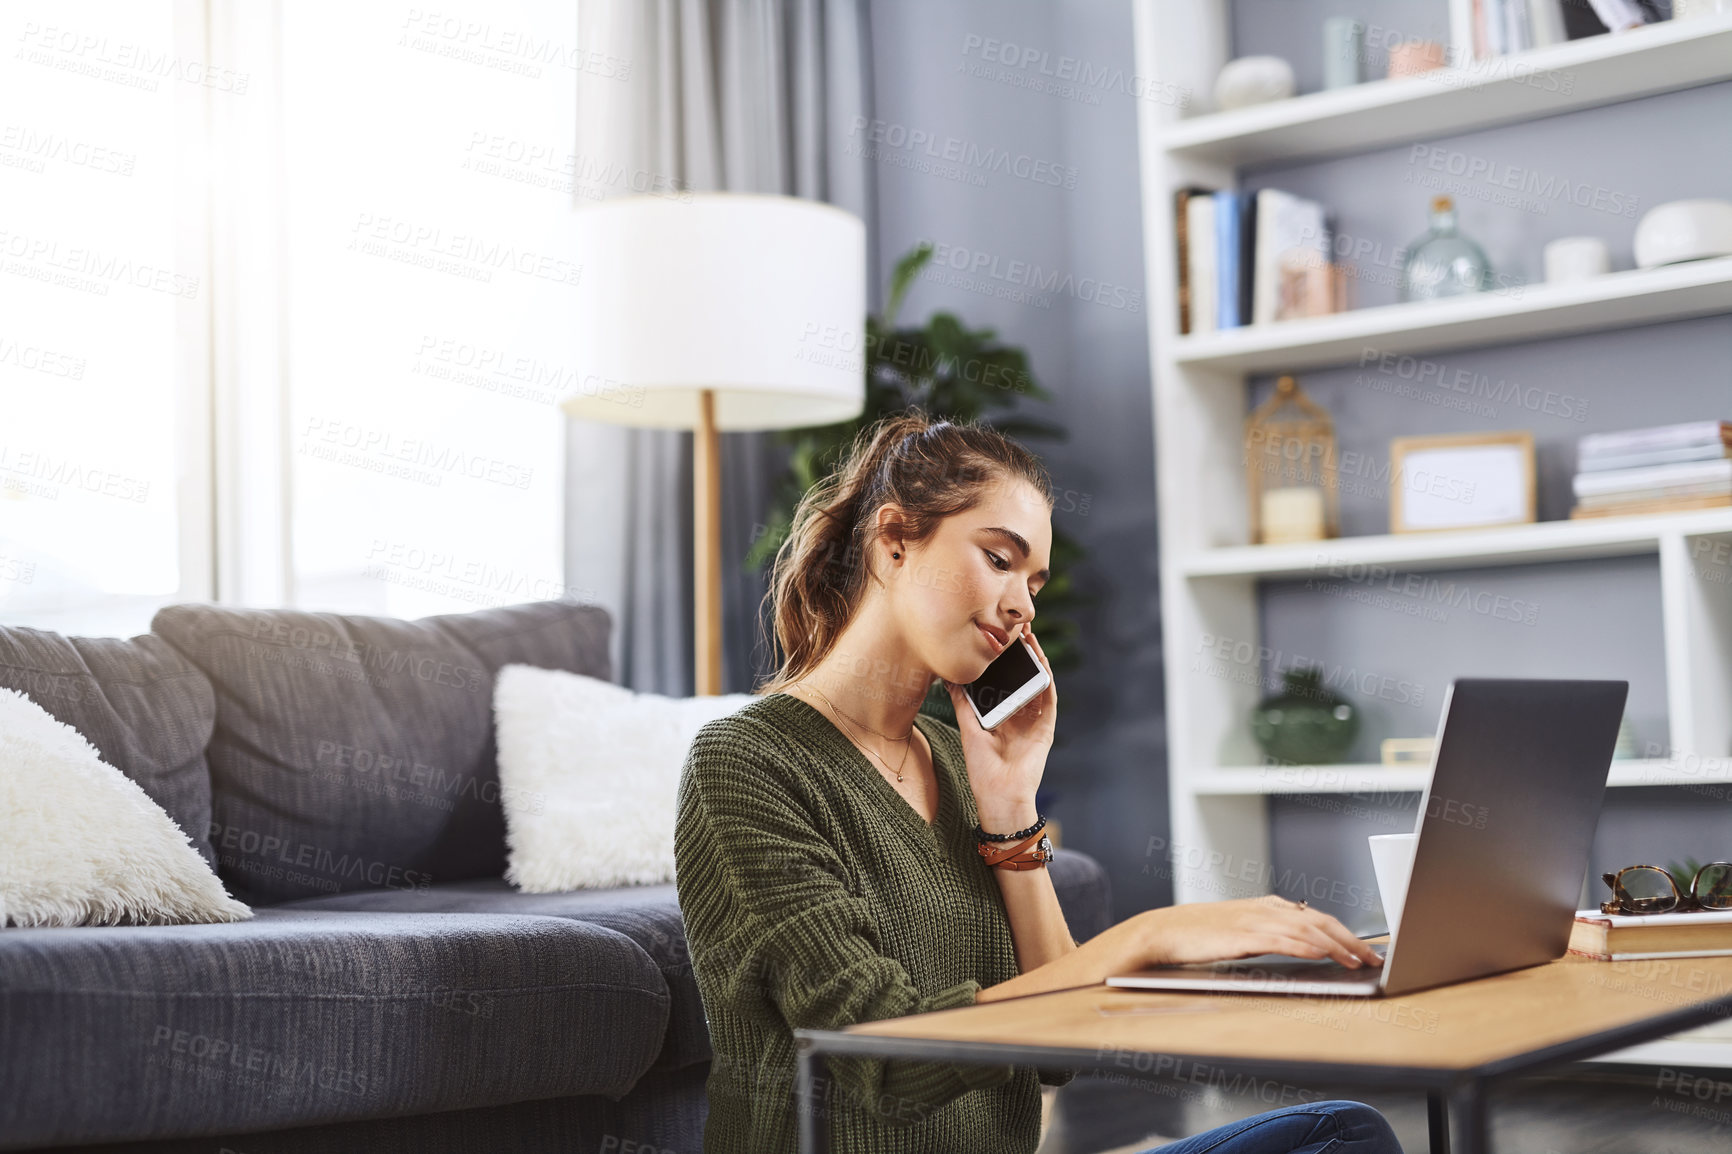 Buy stock photo Shot of a beautiful young woman taking a phone call while working on her laptop at home